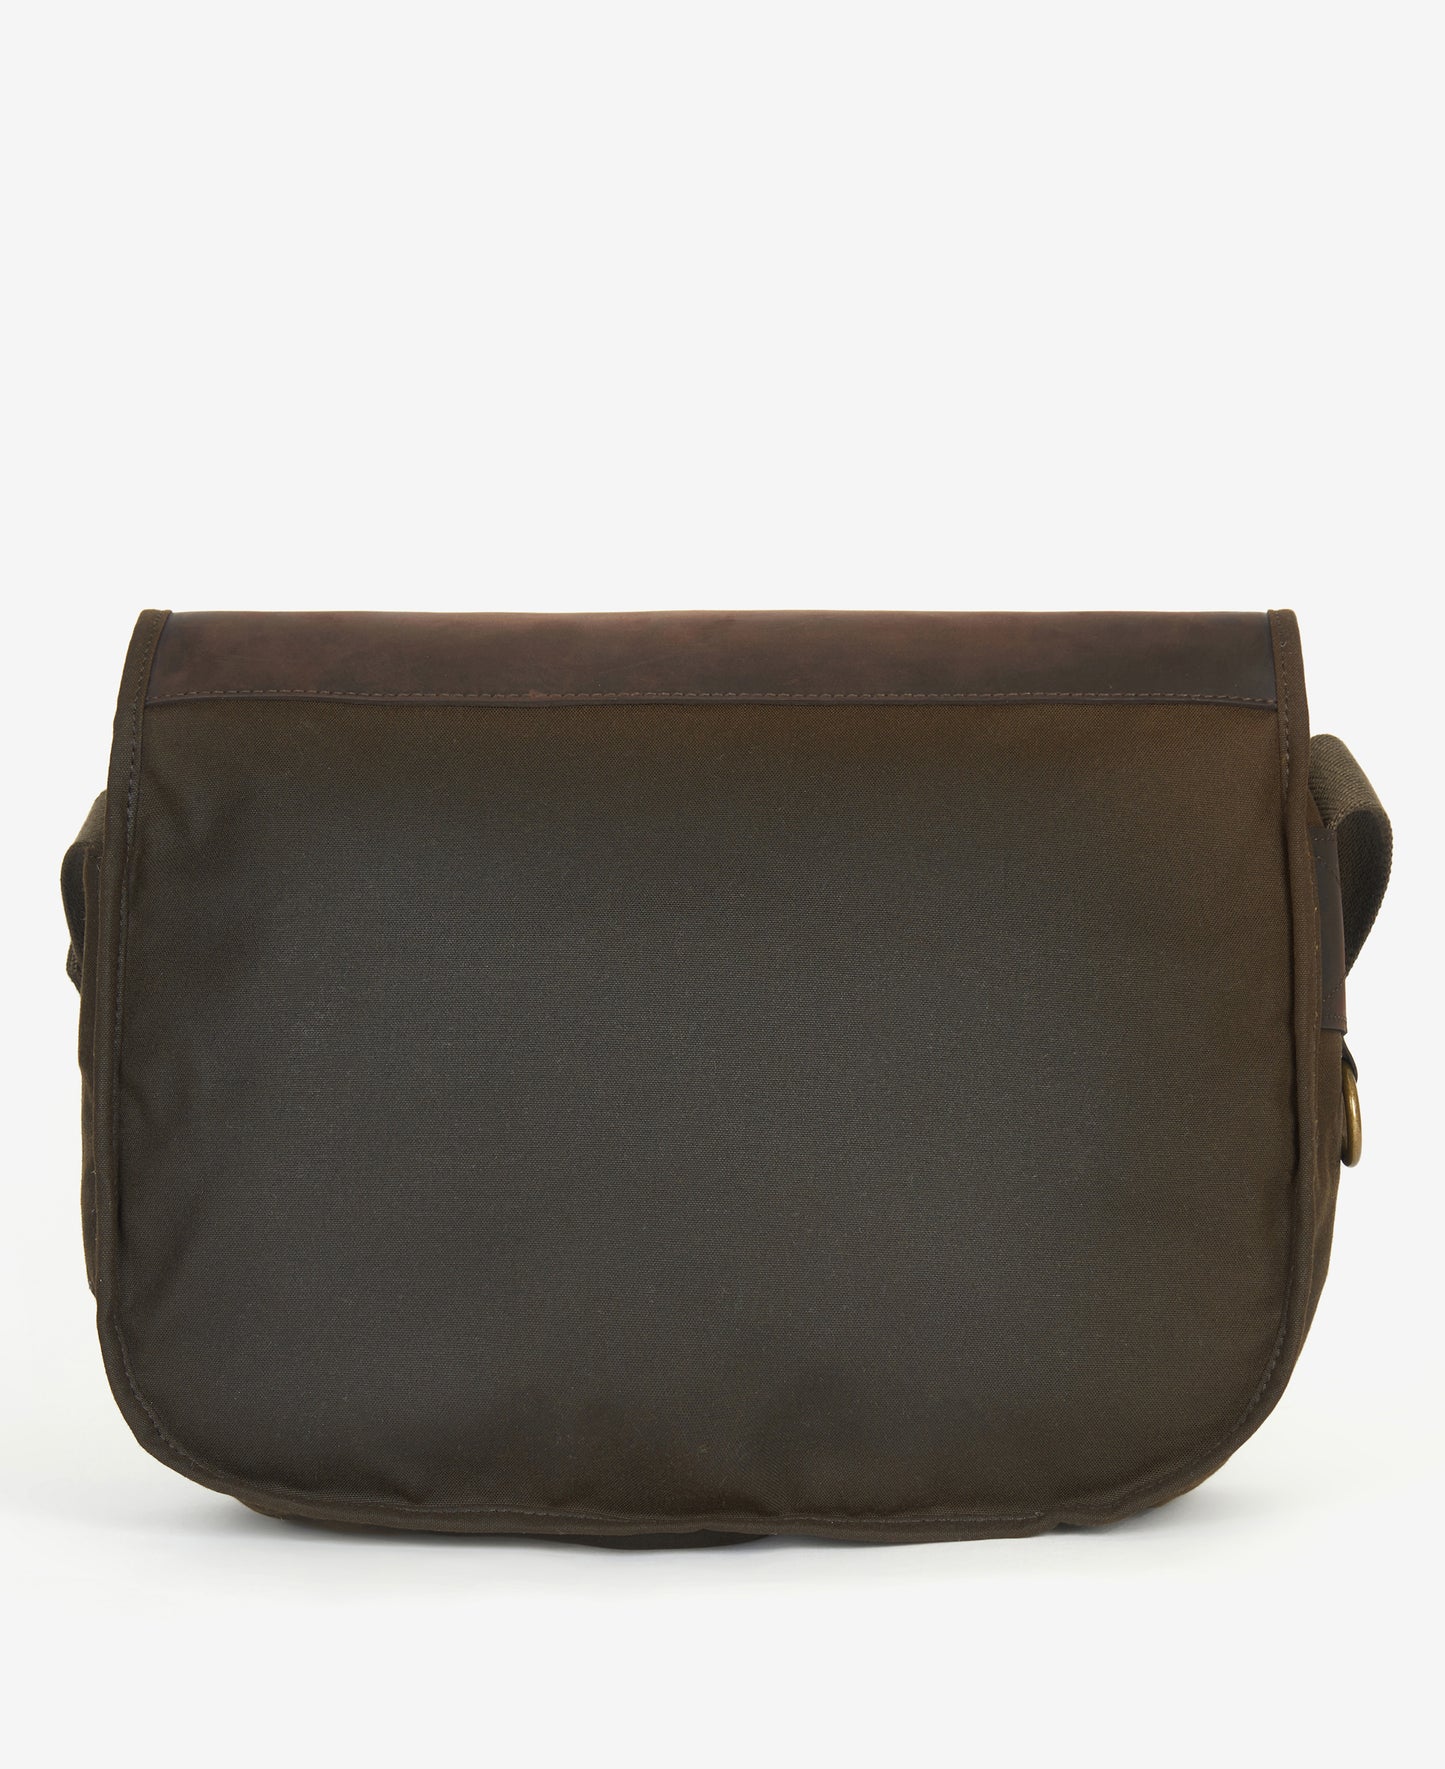 Barbour Wax Leather Tarras Bag